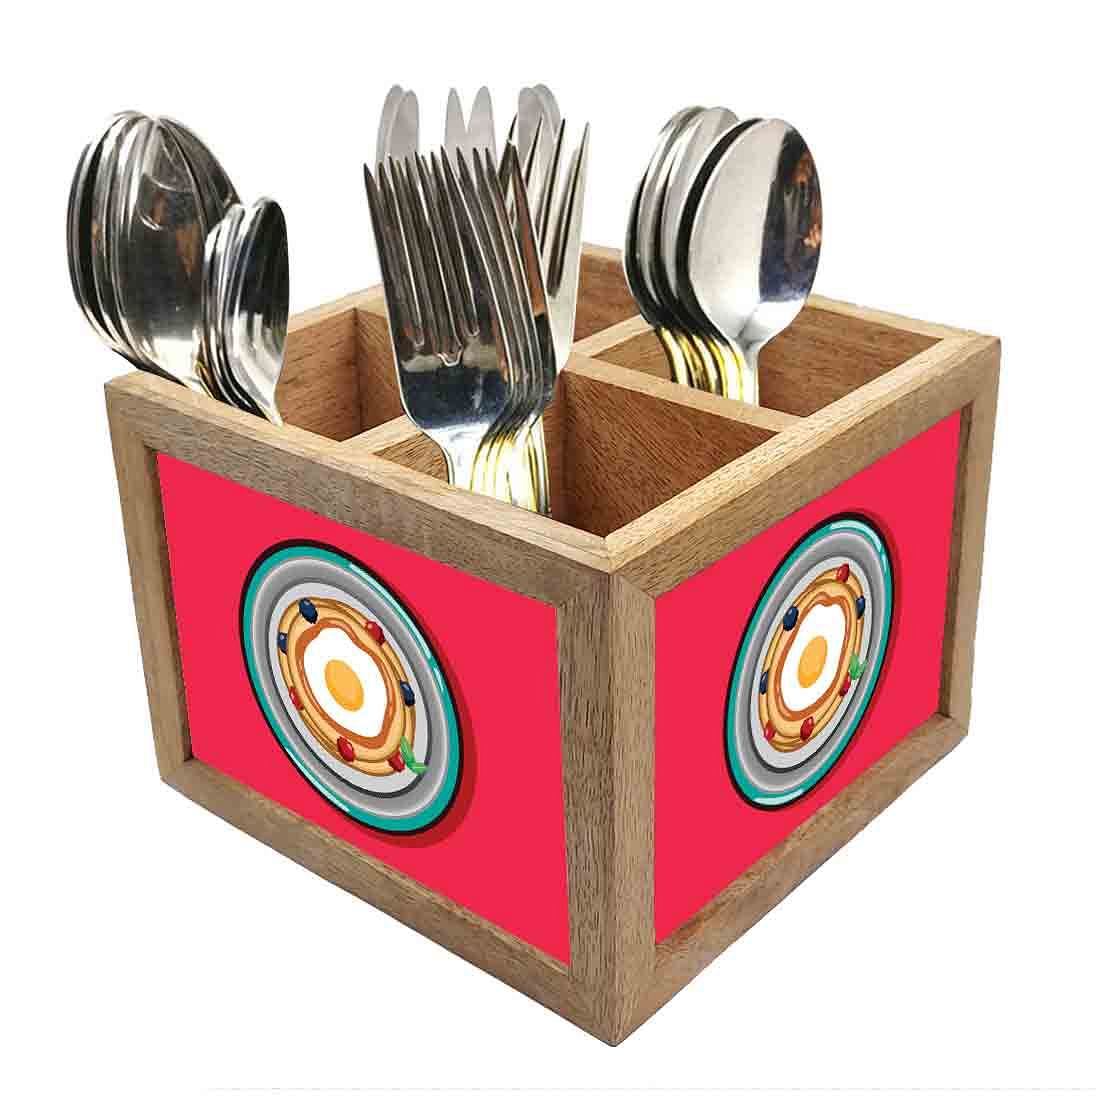 Spoon & Forks Cutlery Holder for Dining Table -  Breakfast Nutcase